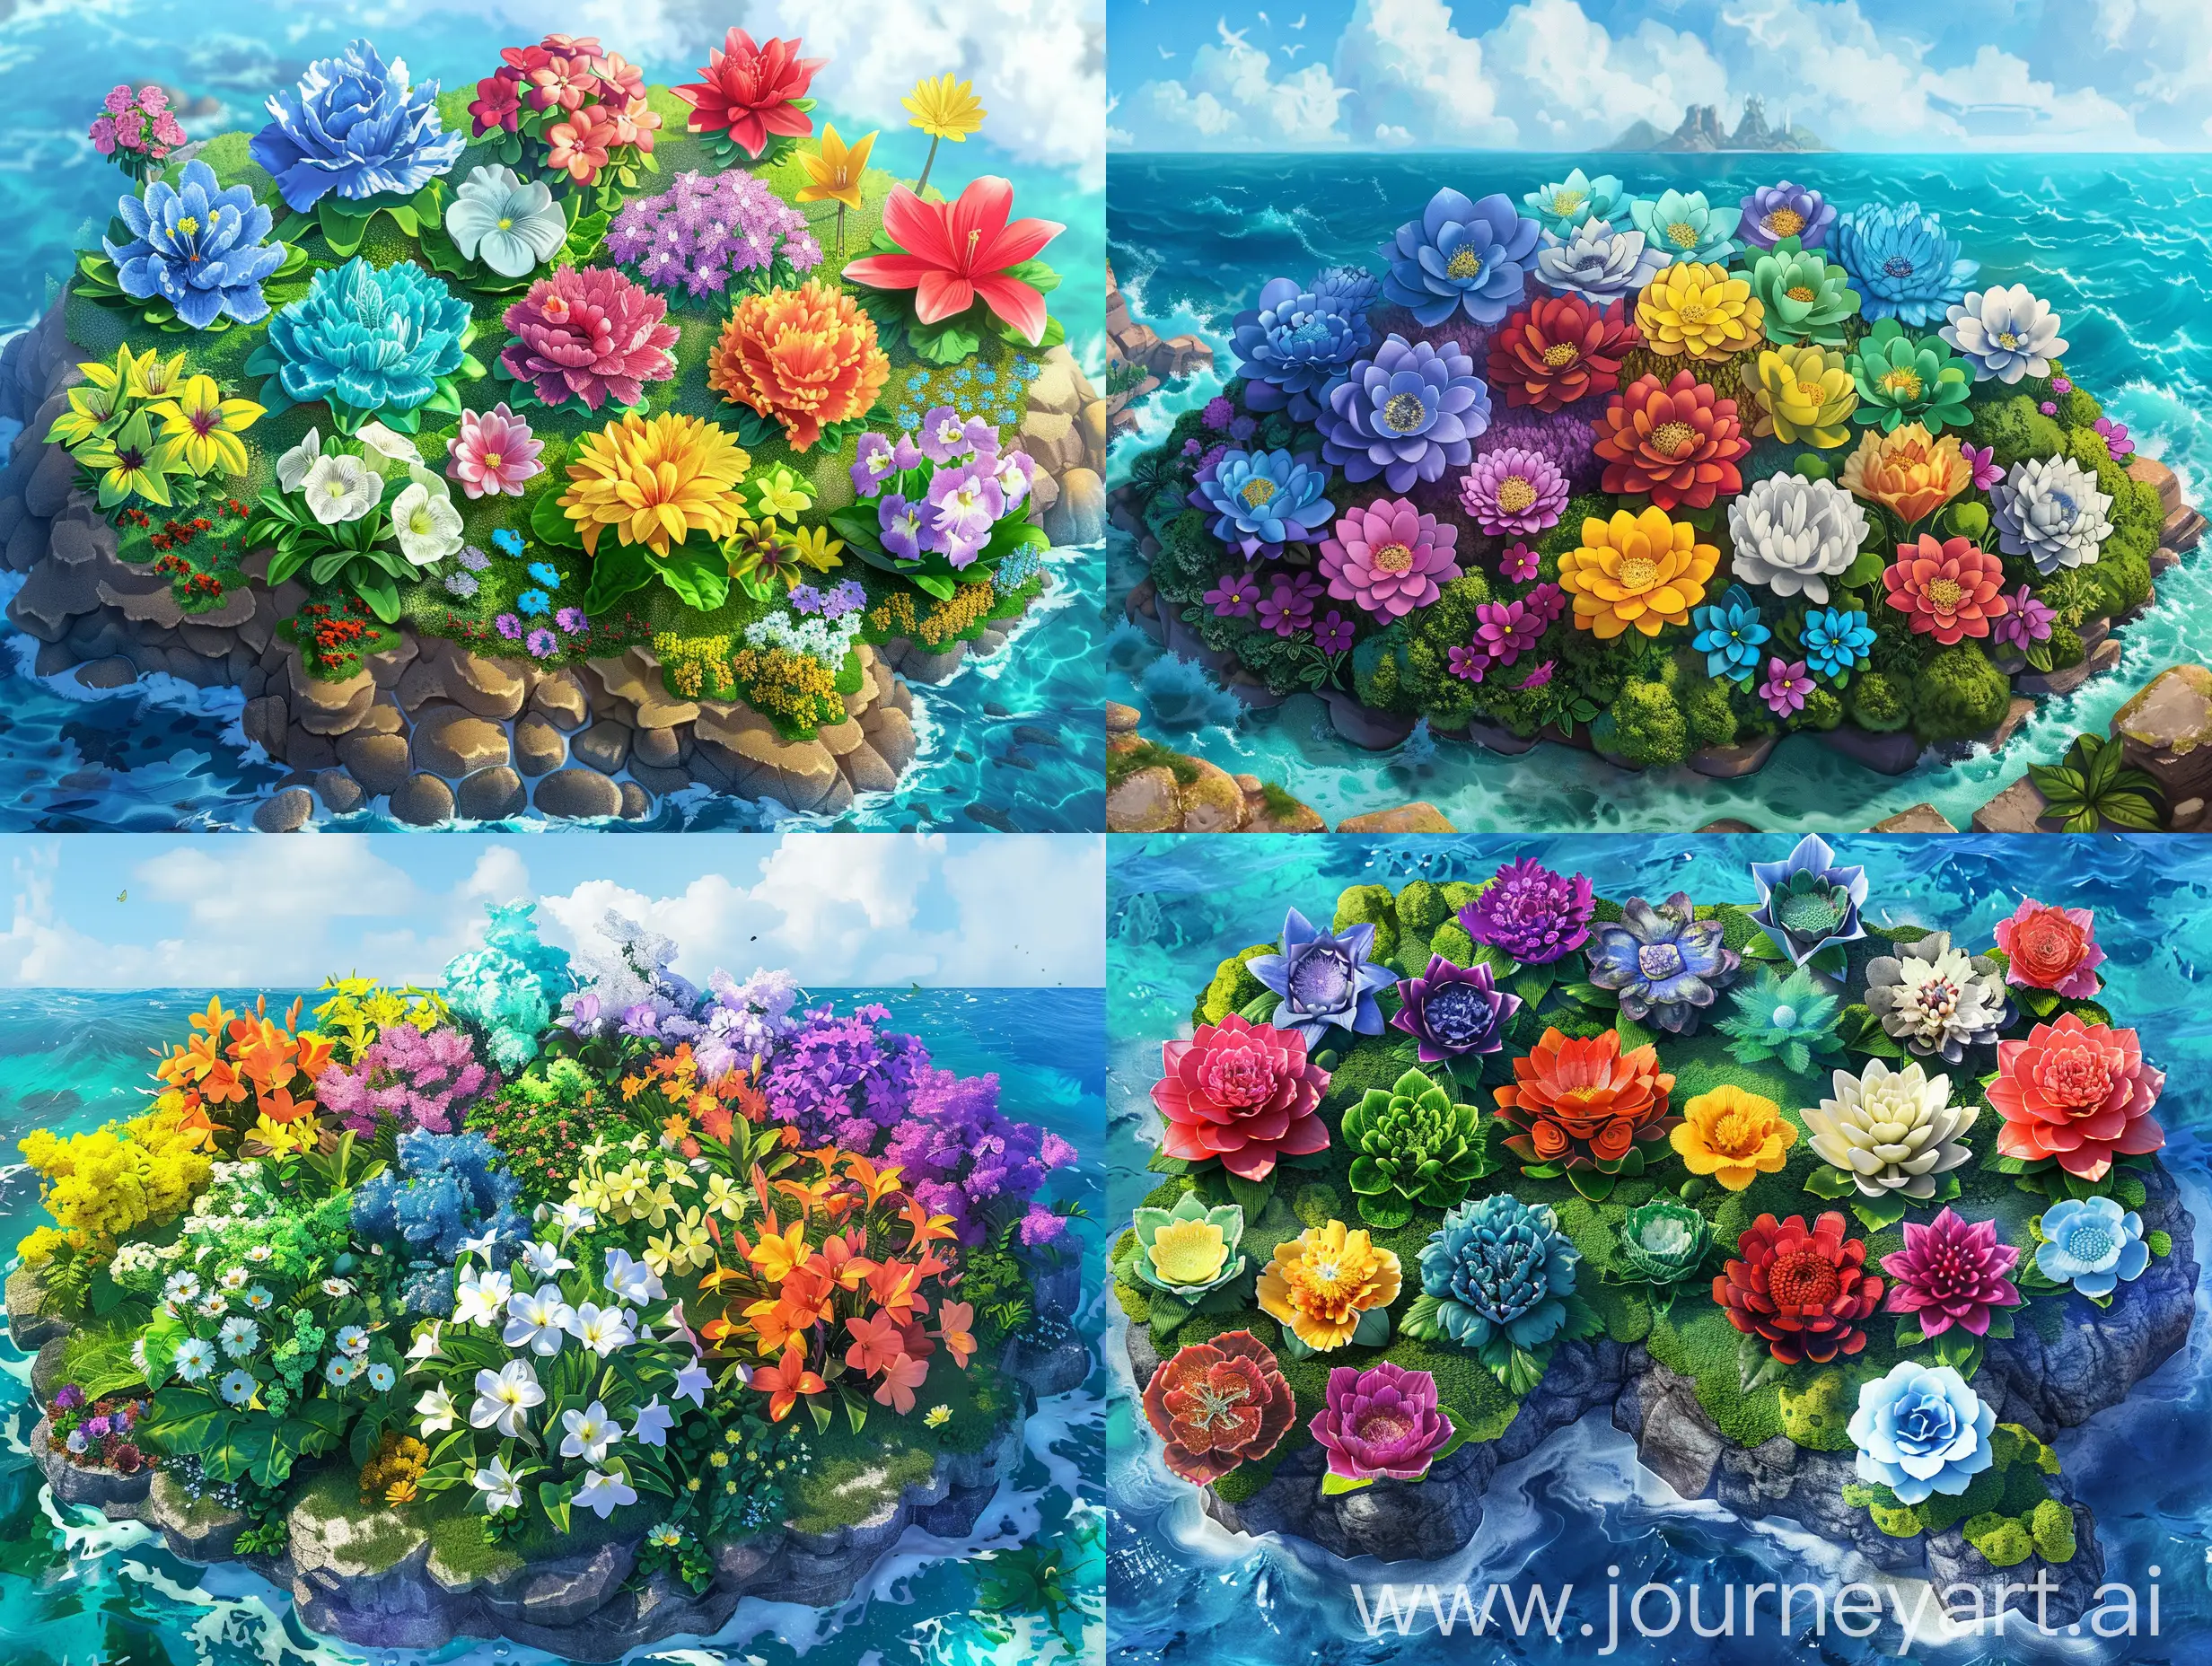 On the vibrant coastline of a small island lies a magical garden known as the "Mathnasium Flower Garden." In this colorful garden, there are 20 different flowers, each bearing a unique and beautiful color.